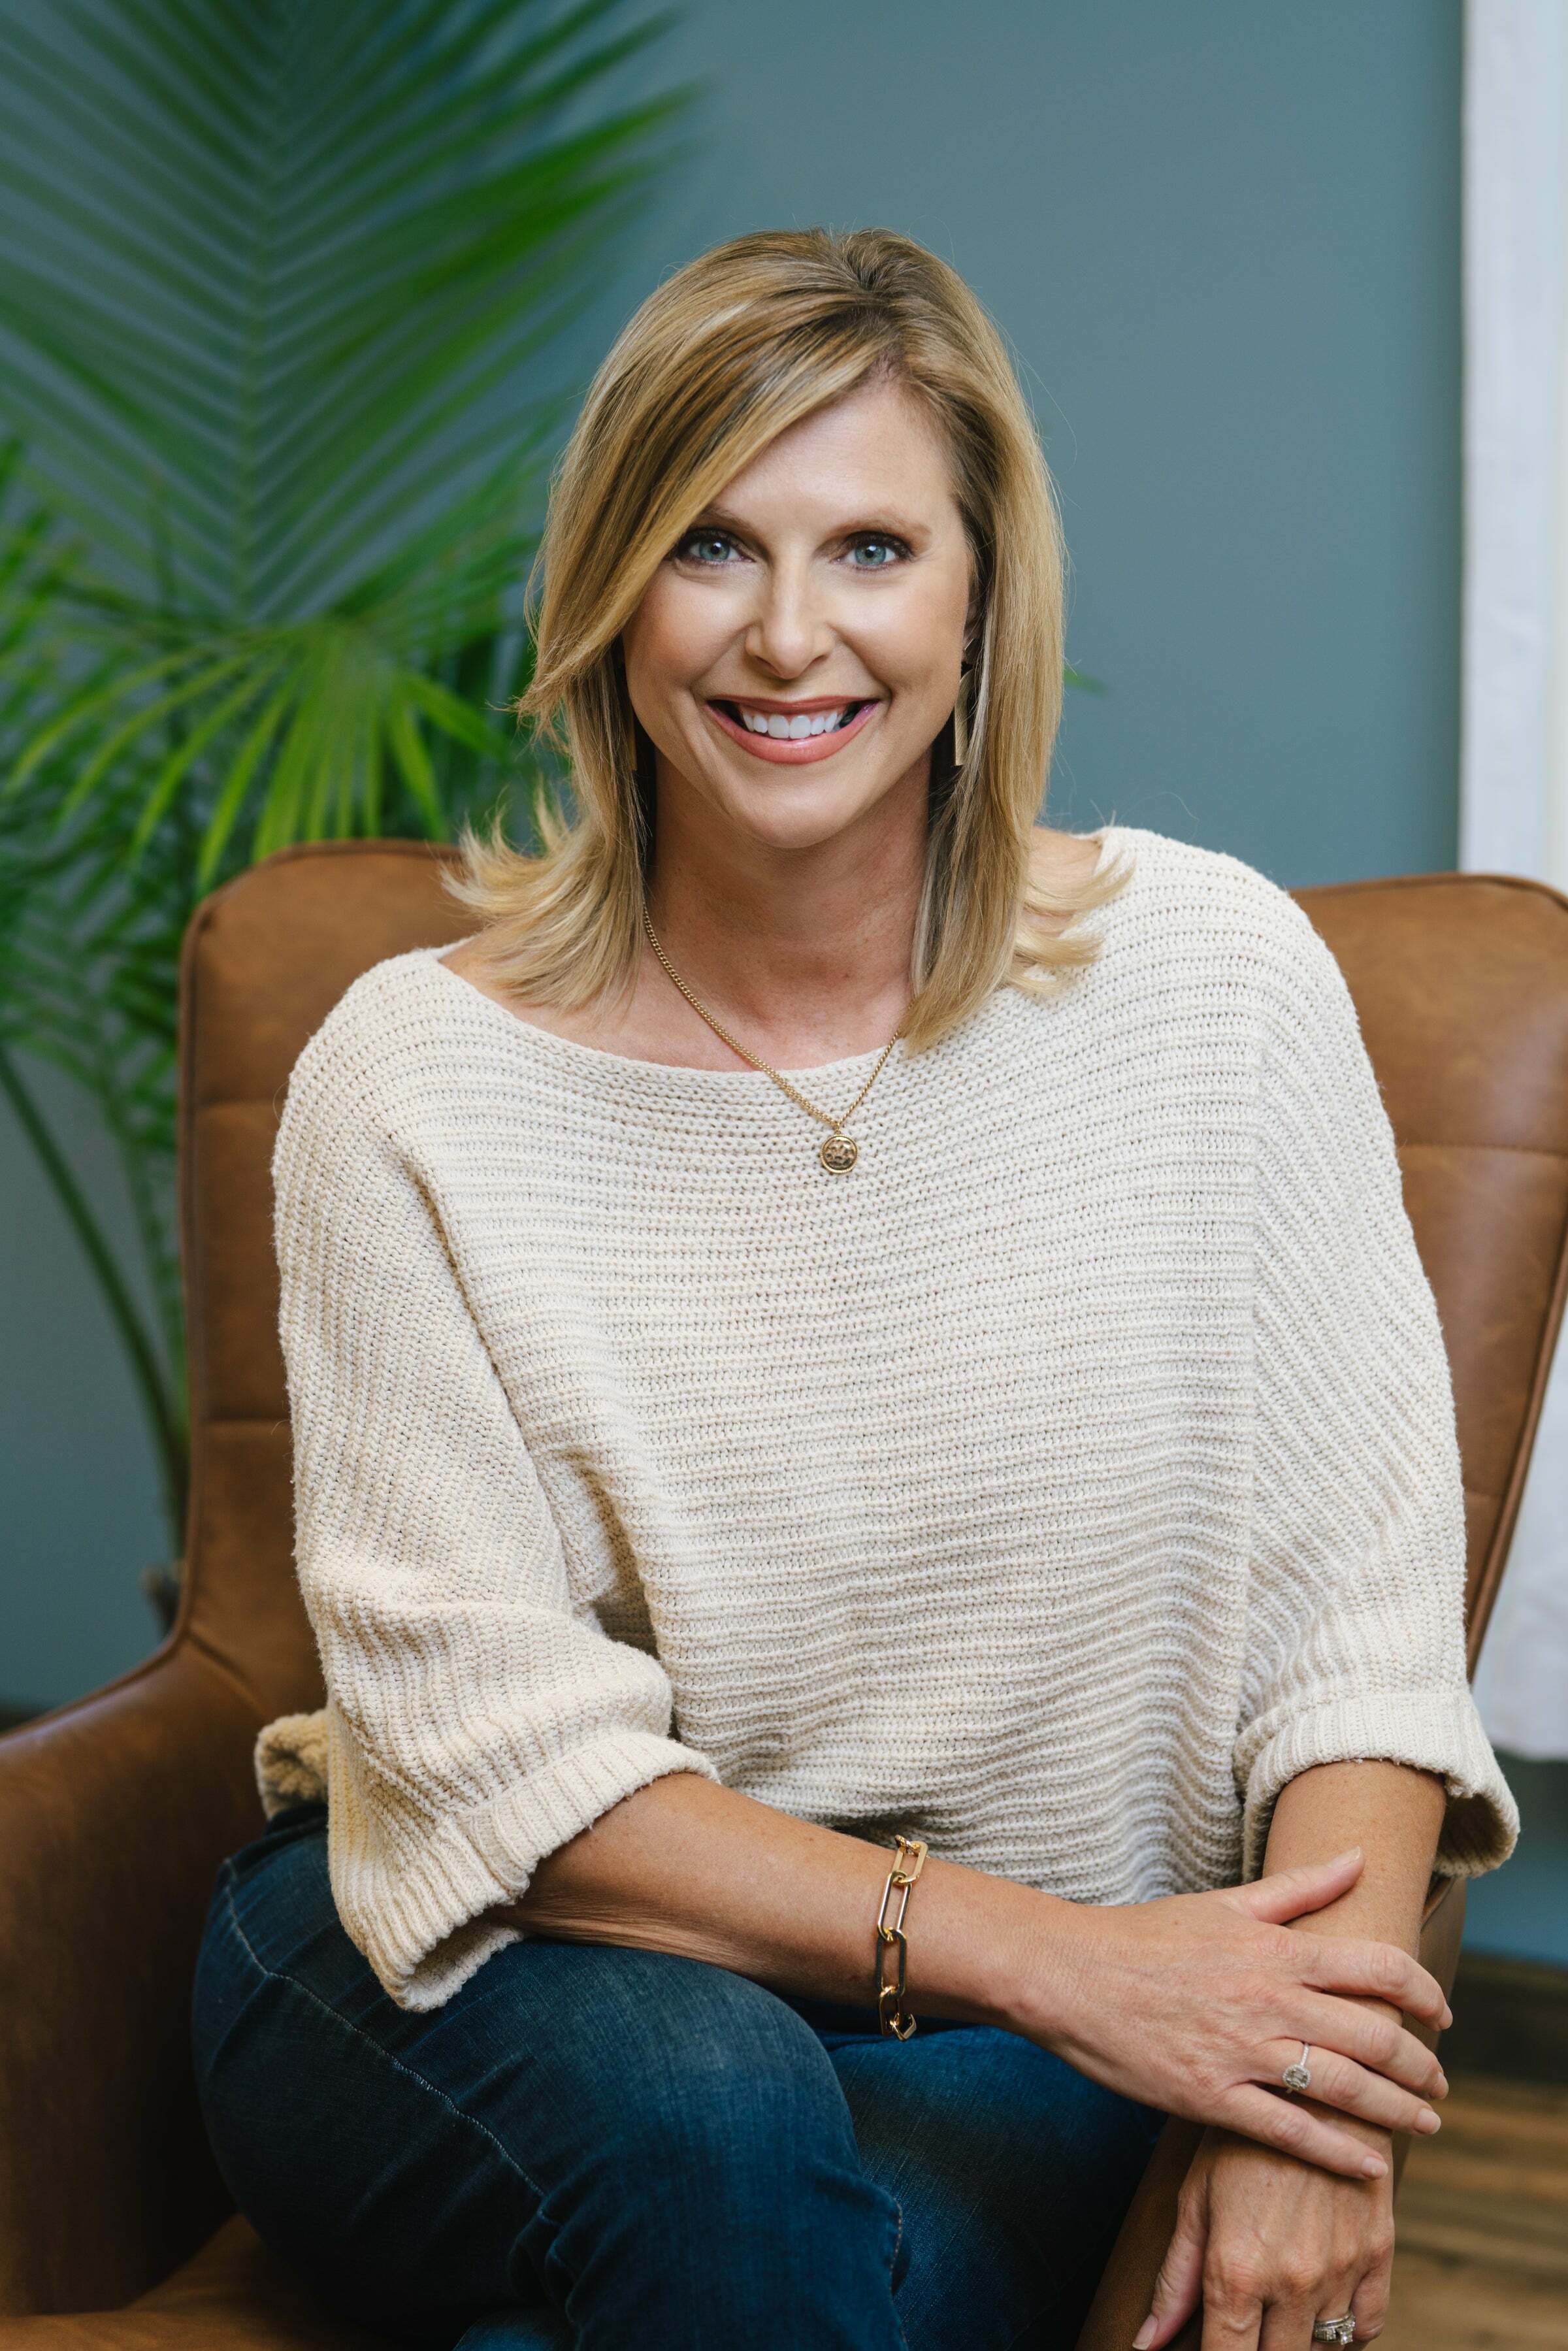 Stefanie Knight, Real Estate Salesperson in Pell City, ERA King Real Estate Company, Inc.